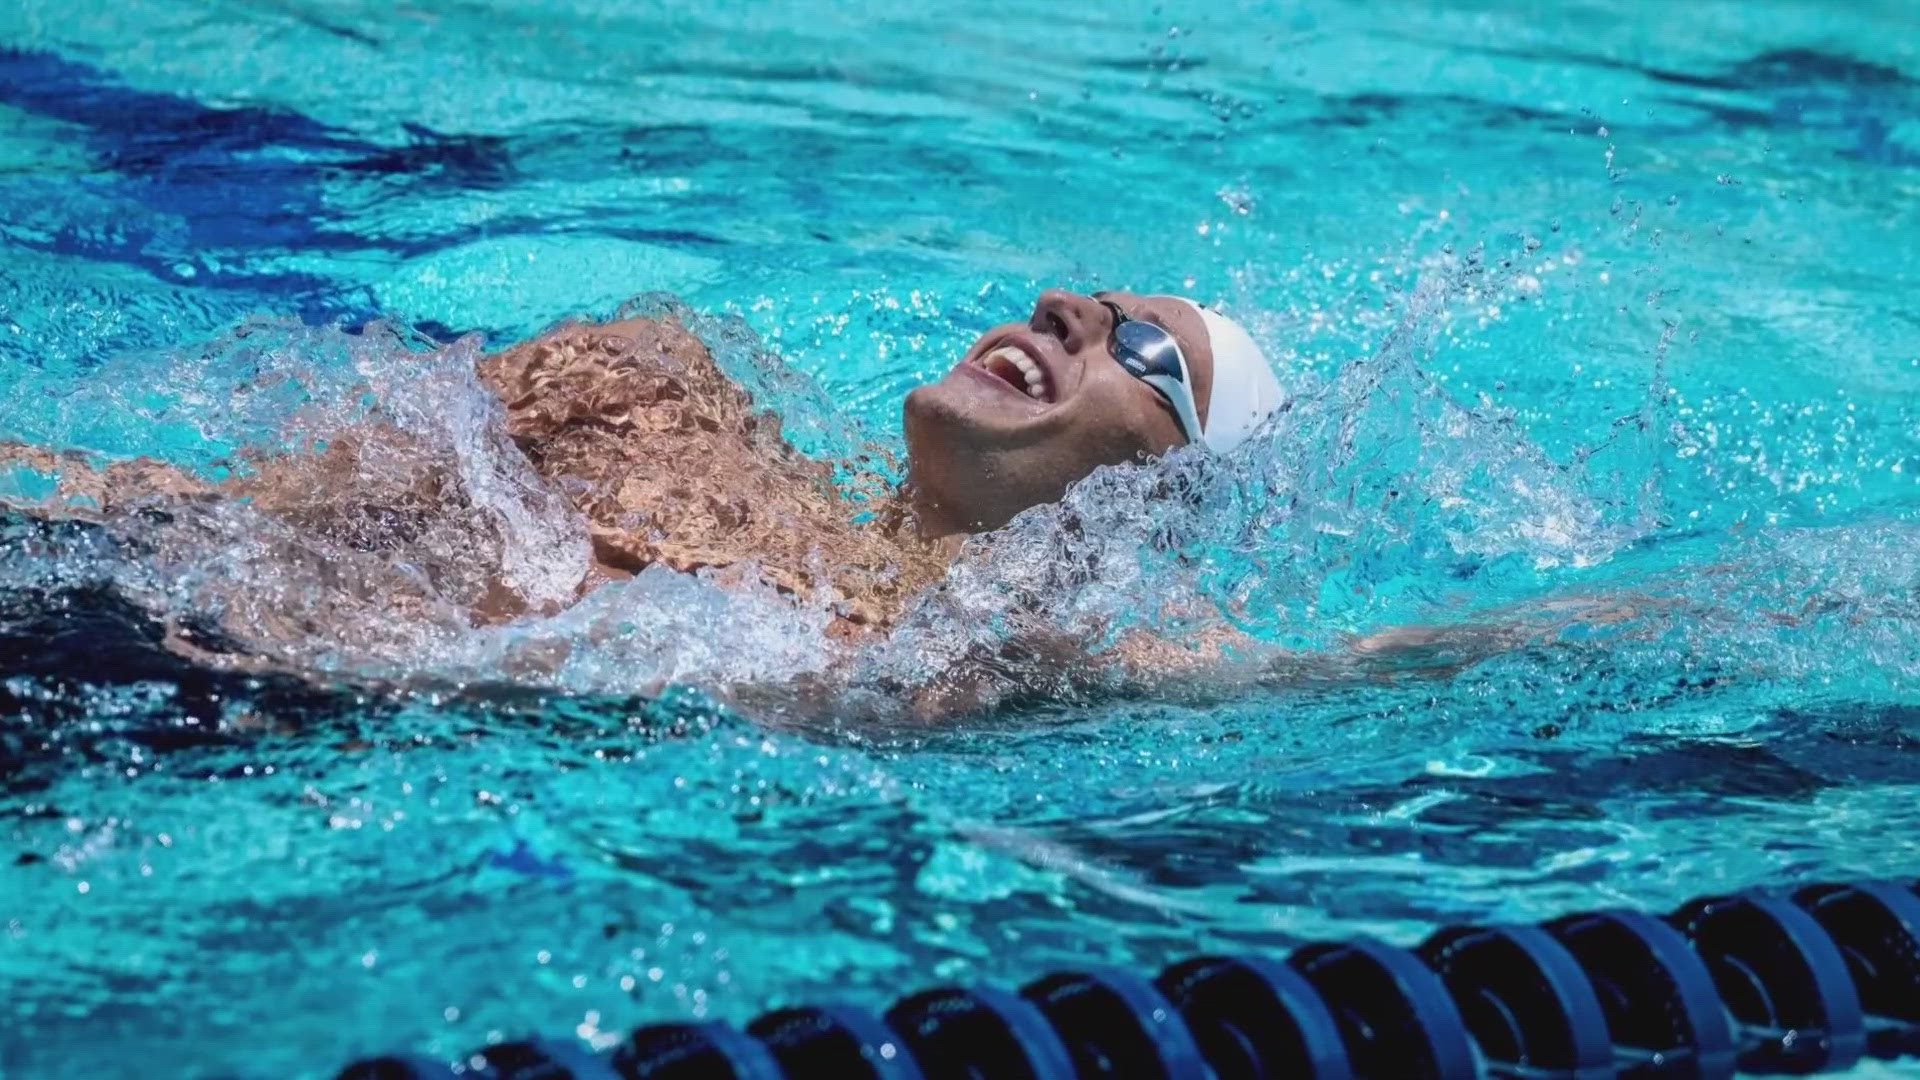 Landon Kyser was one-hundredth of a second from the US Olympic swimming trials qualifying time and down to his last race to hit the mark.